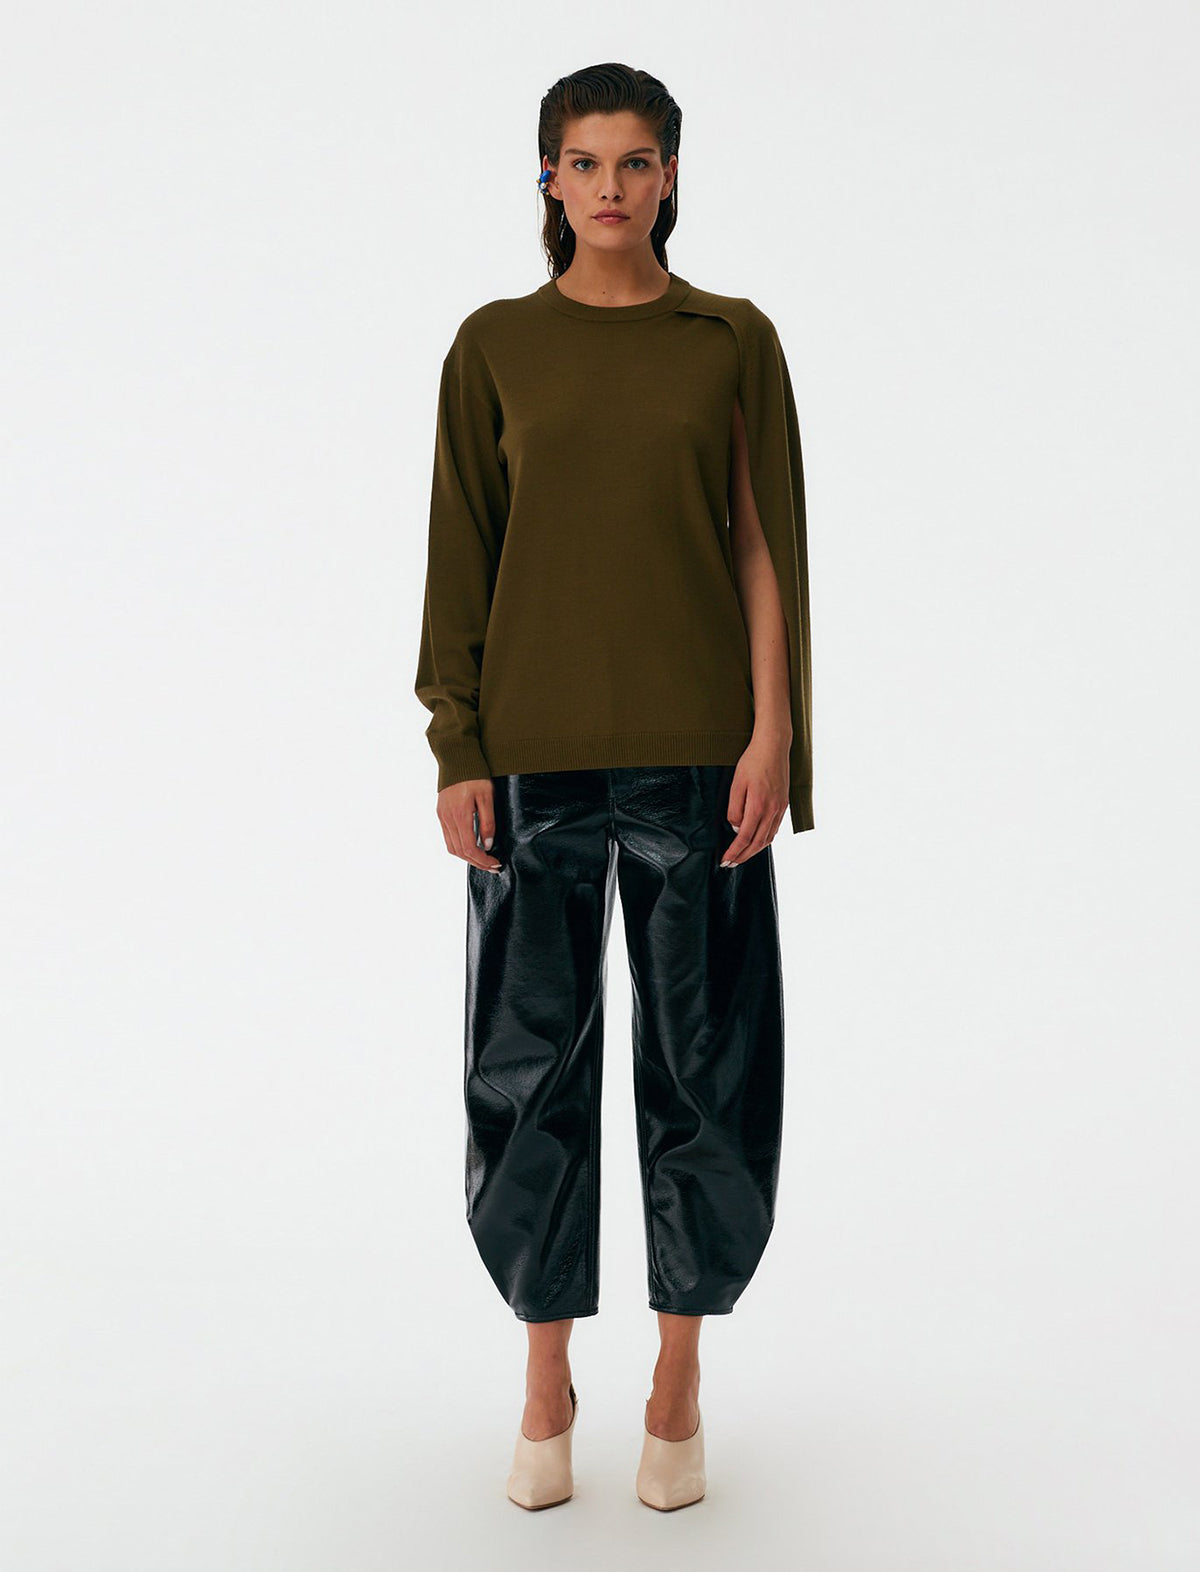 TIBI Faux Leather Sculpted Pants in Black